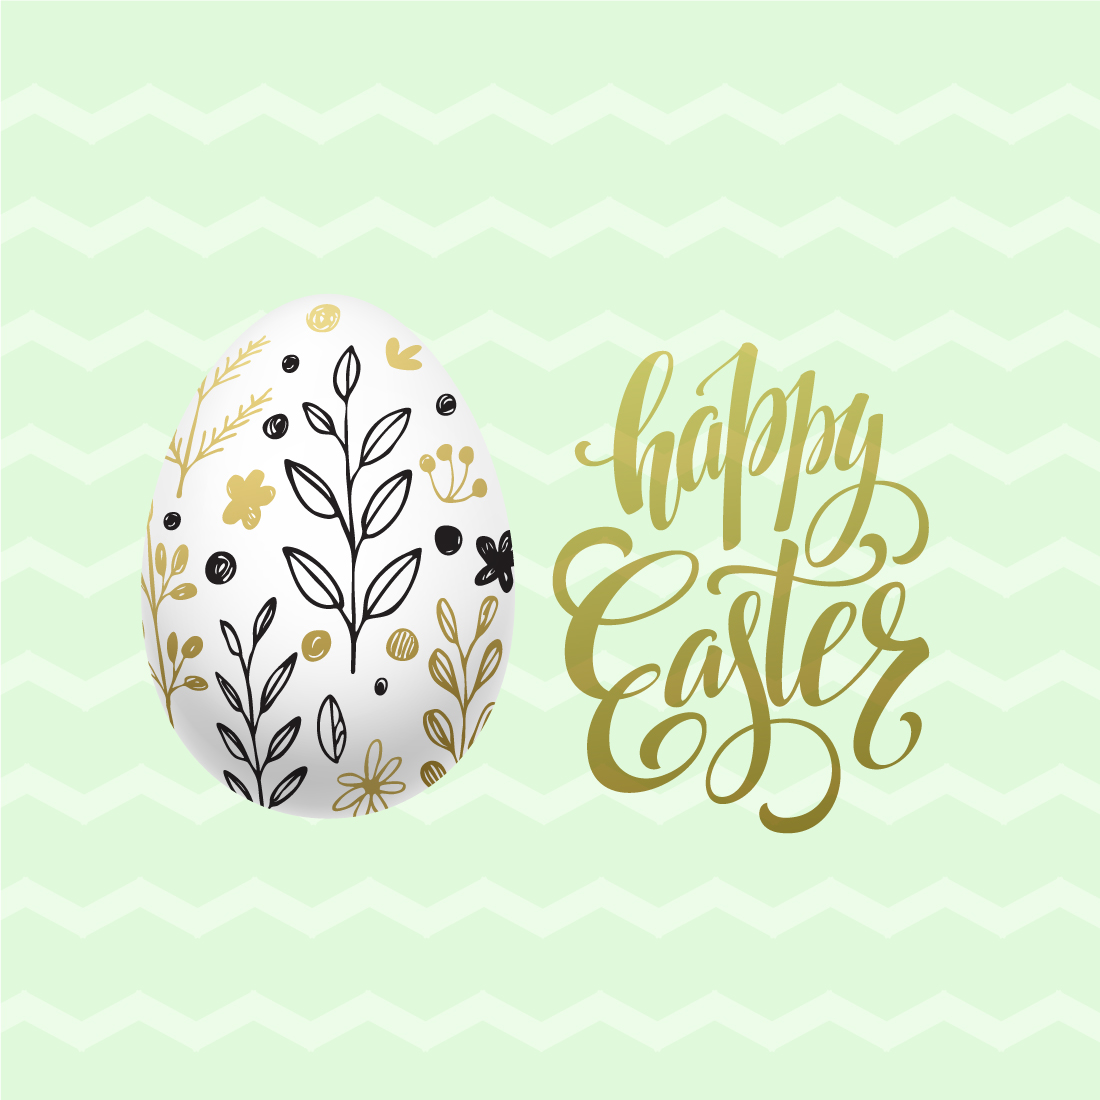 Happy easter card with a painted egg.